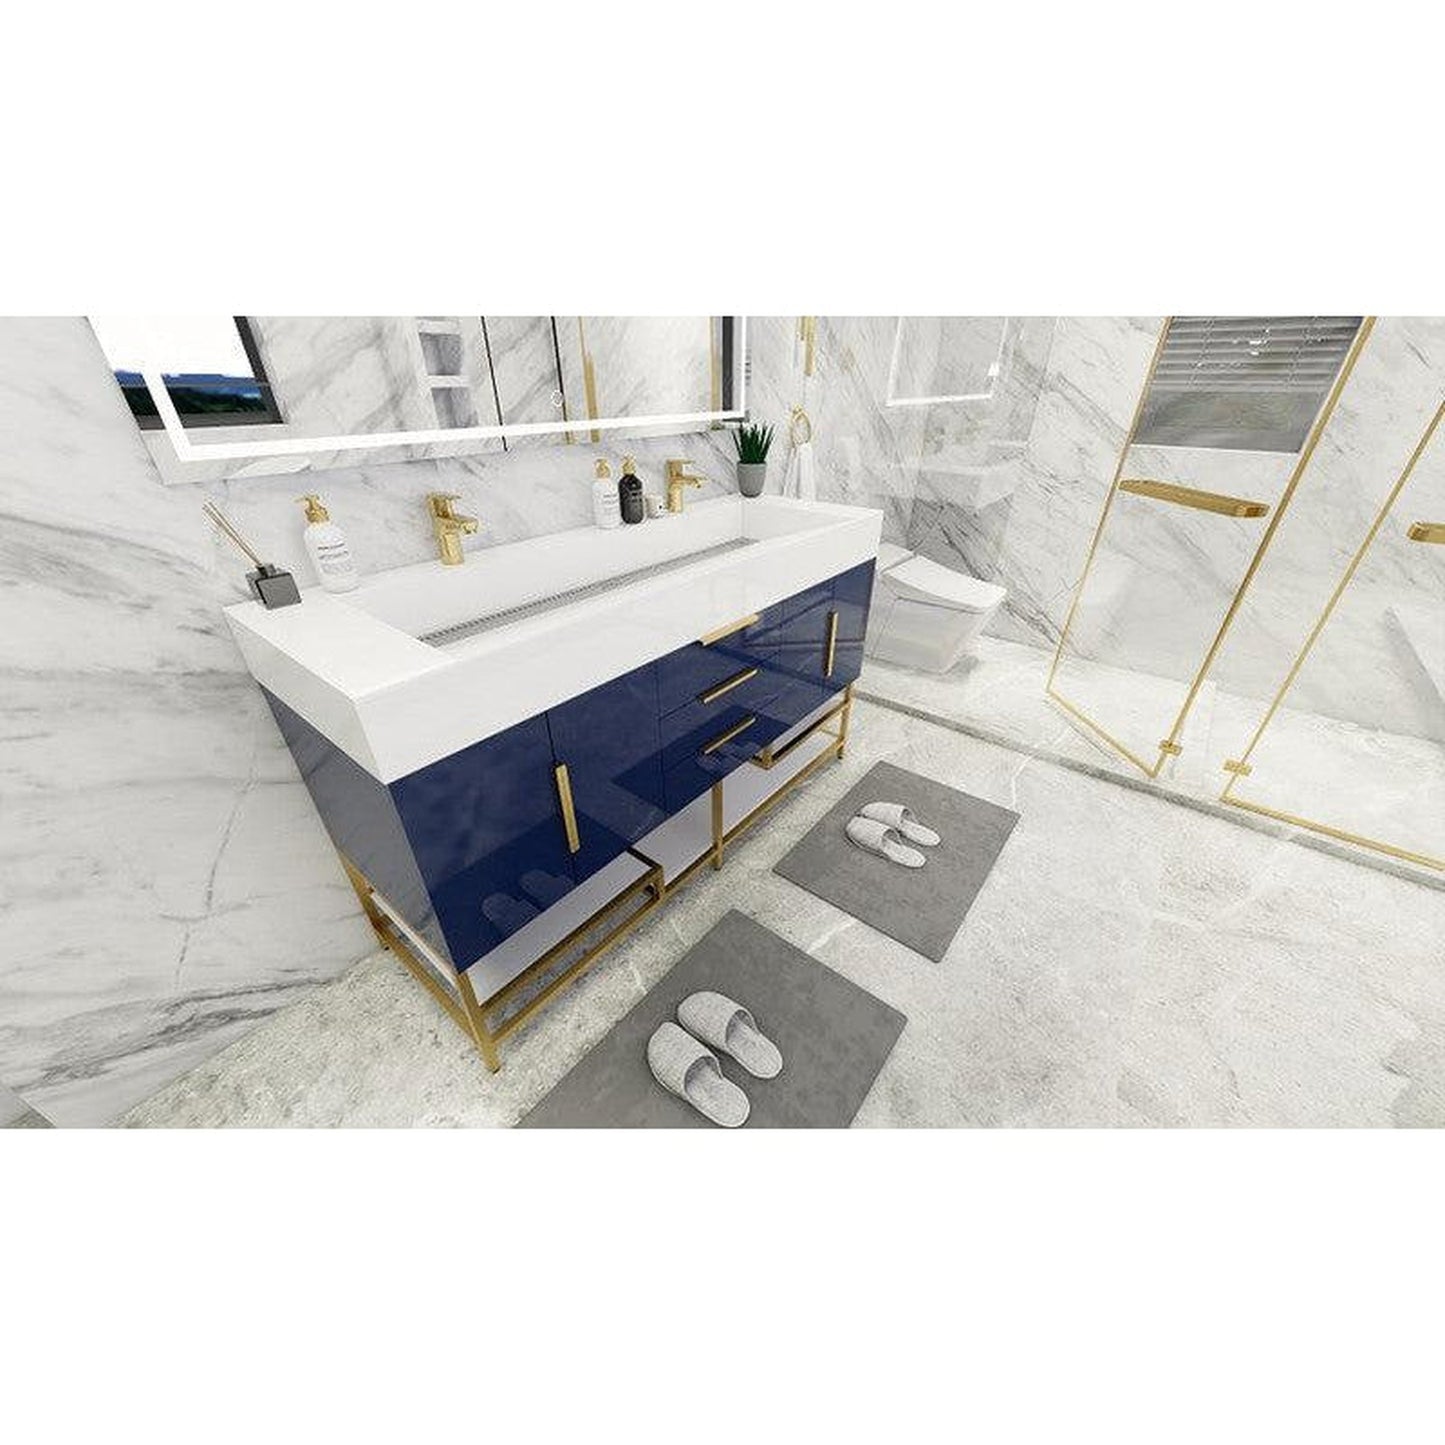 Moreno Bath Bethany 60" High Gloss Night Blue Freestanding Vanity With Double Reinforced White Acrylic Sinks